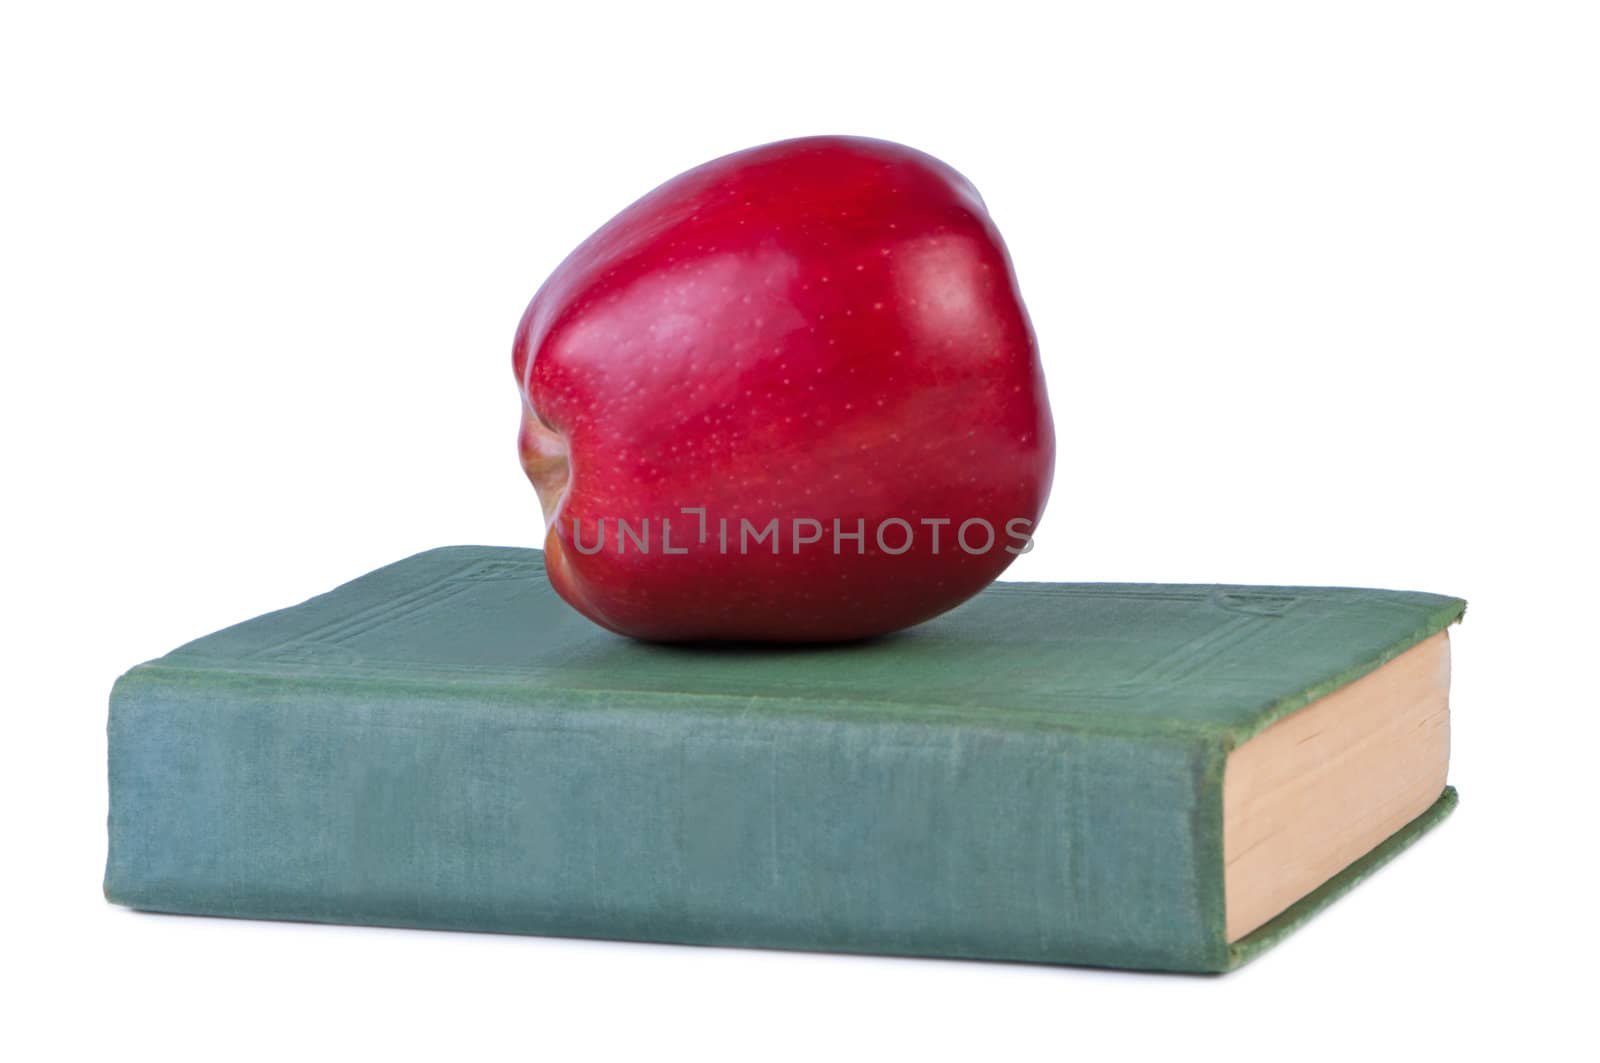 Red apple on old book, isolated on white background.